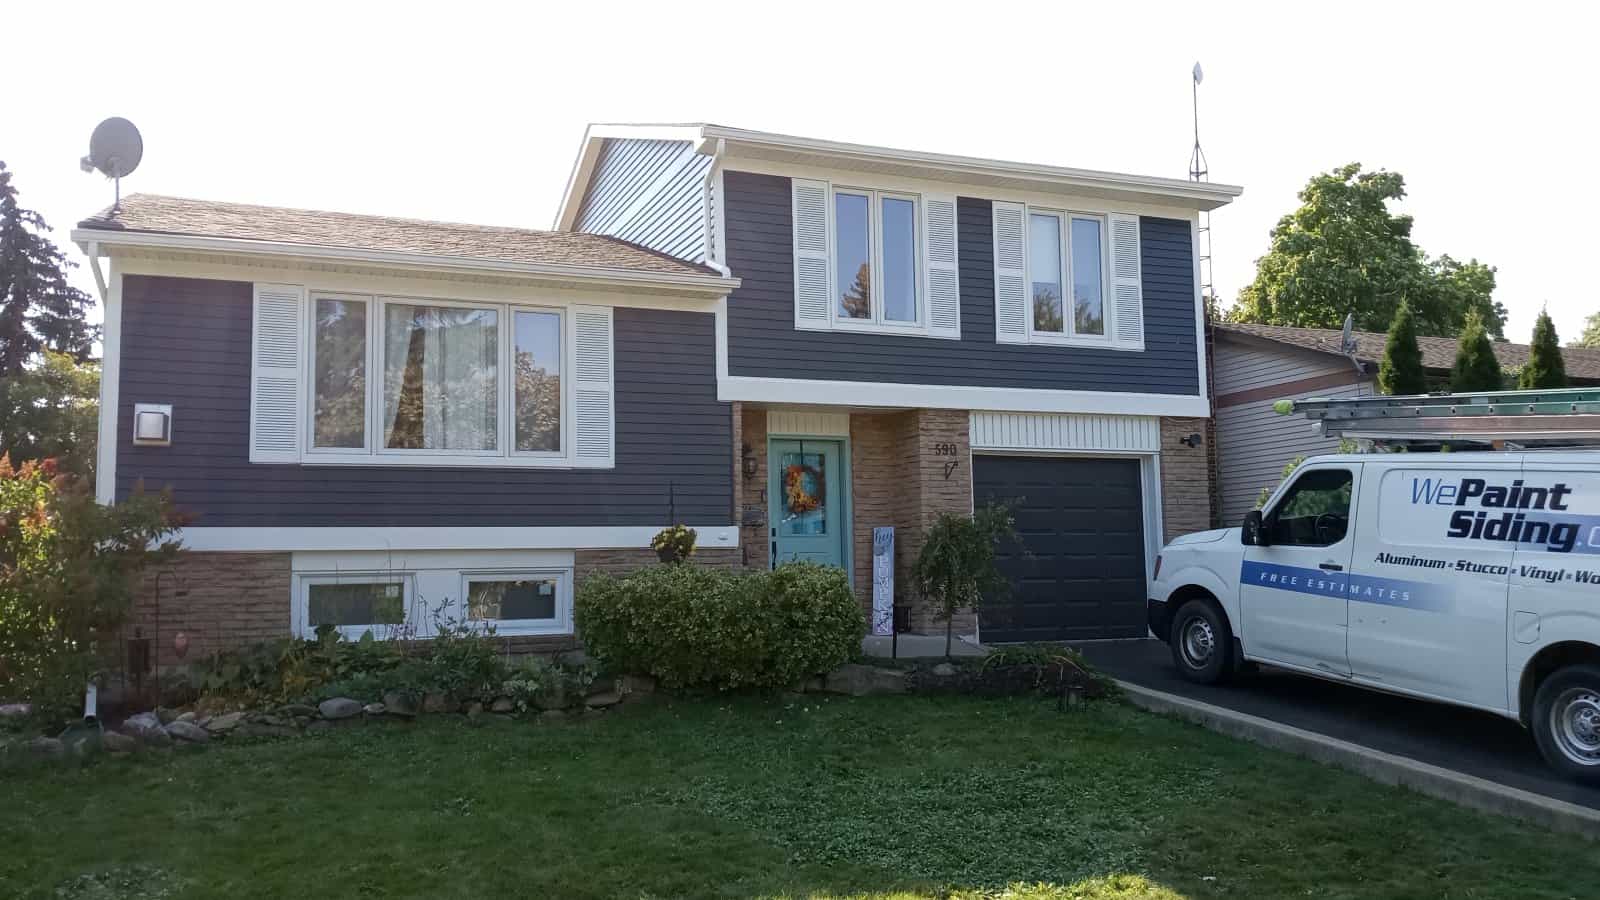 elegant looking house in Niagara Falls with We Paint Siding van in front.